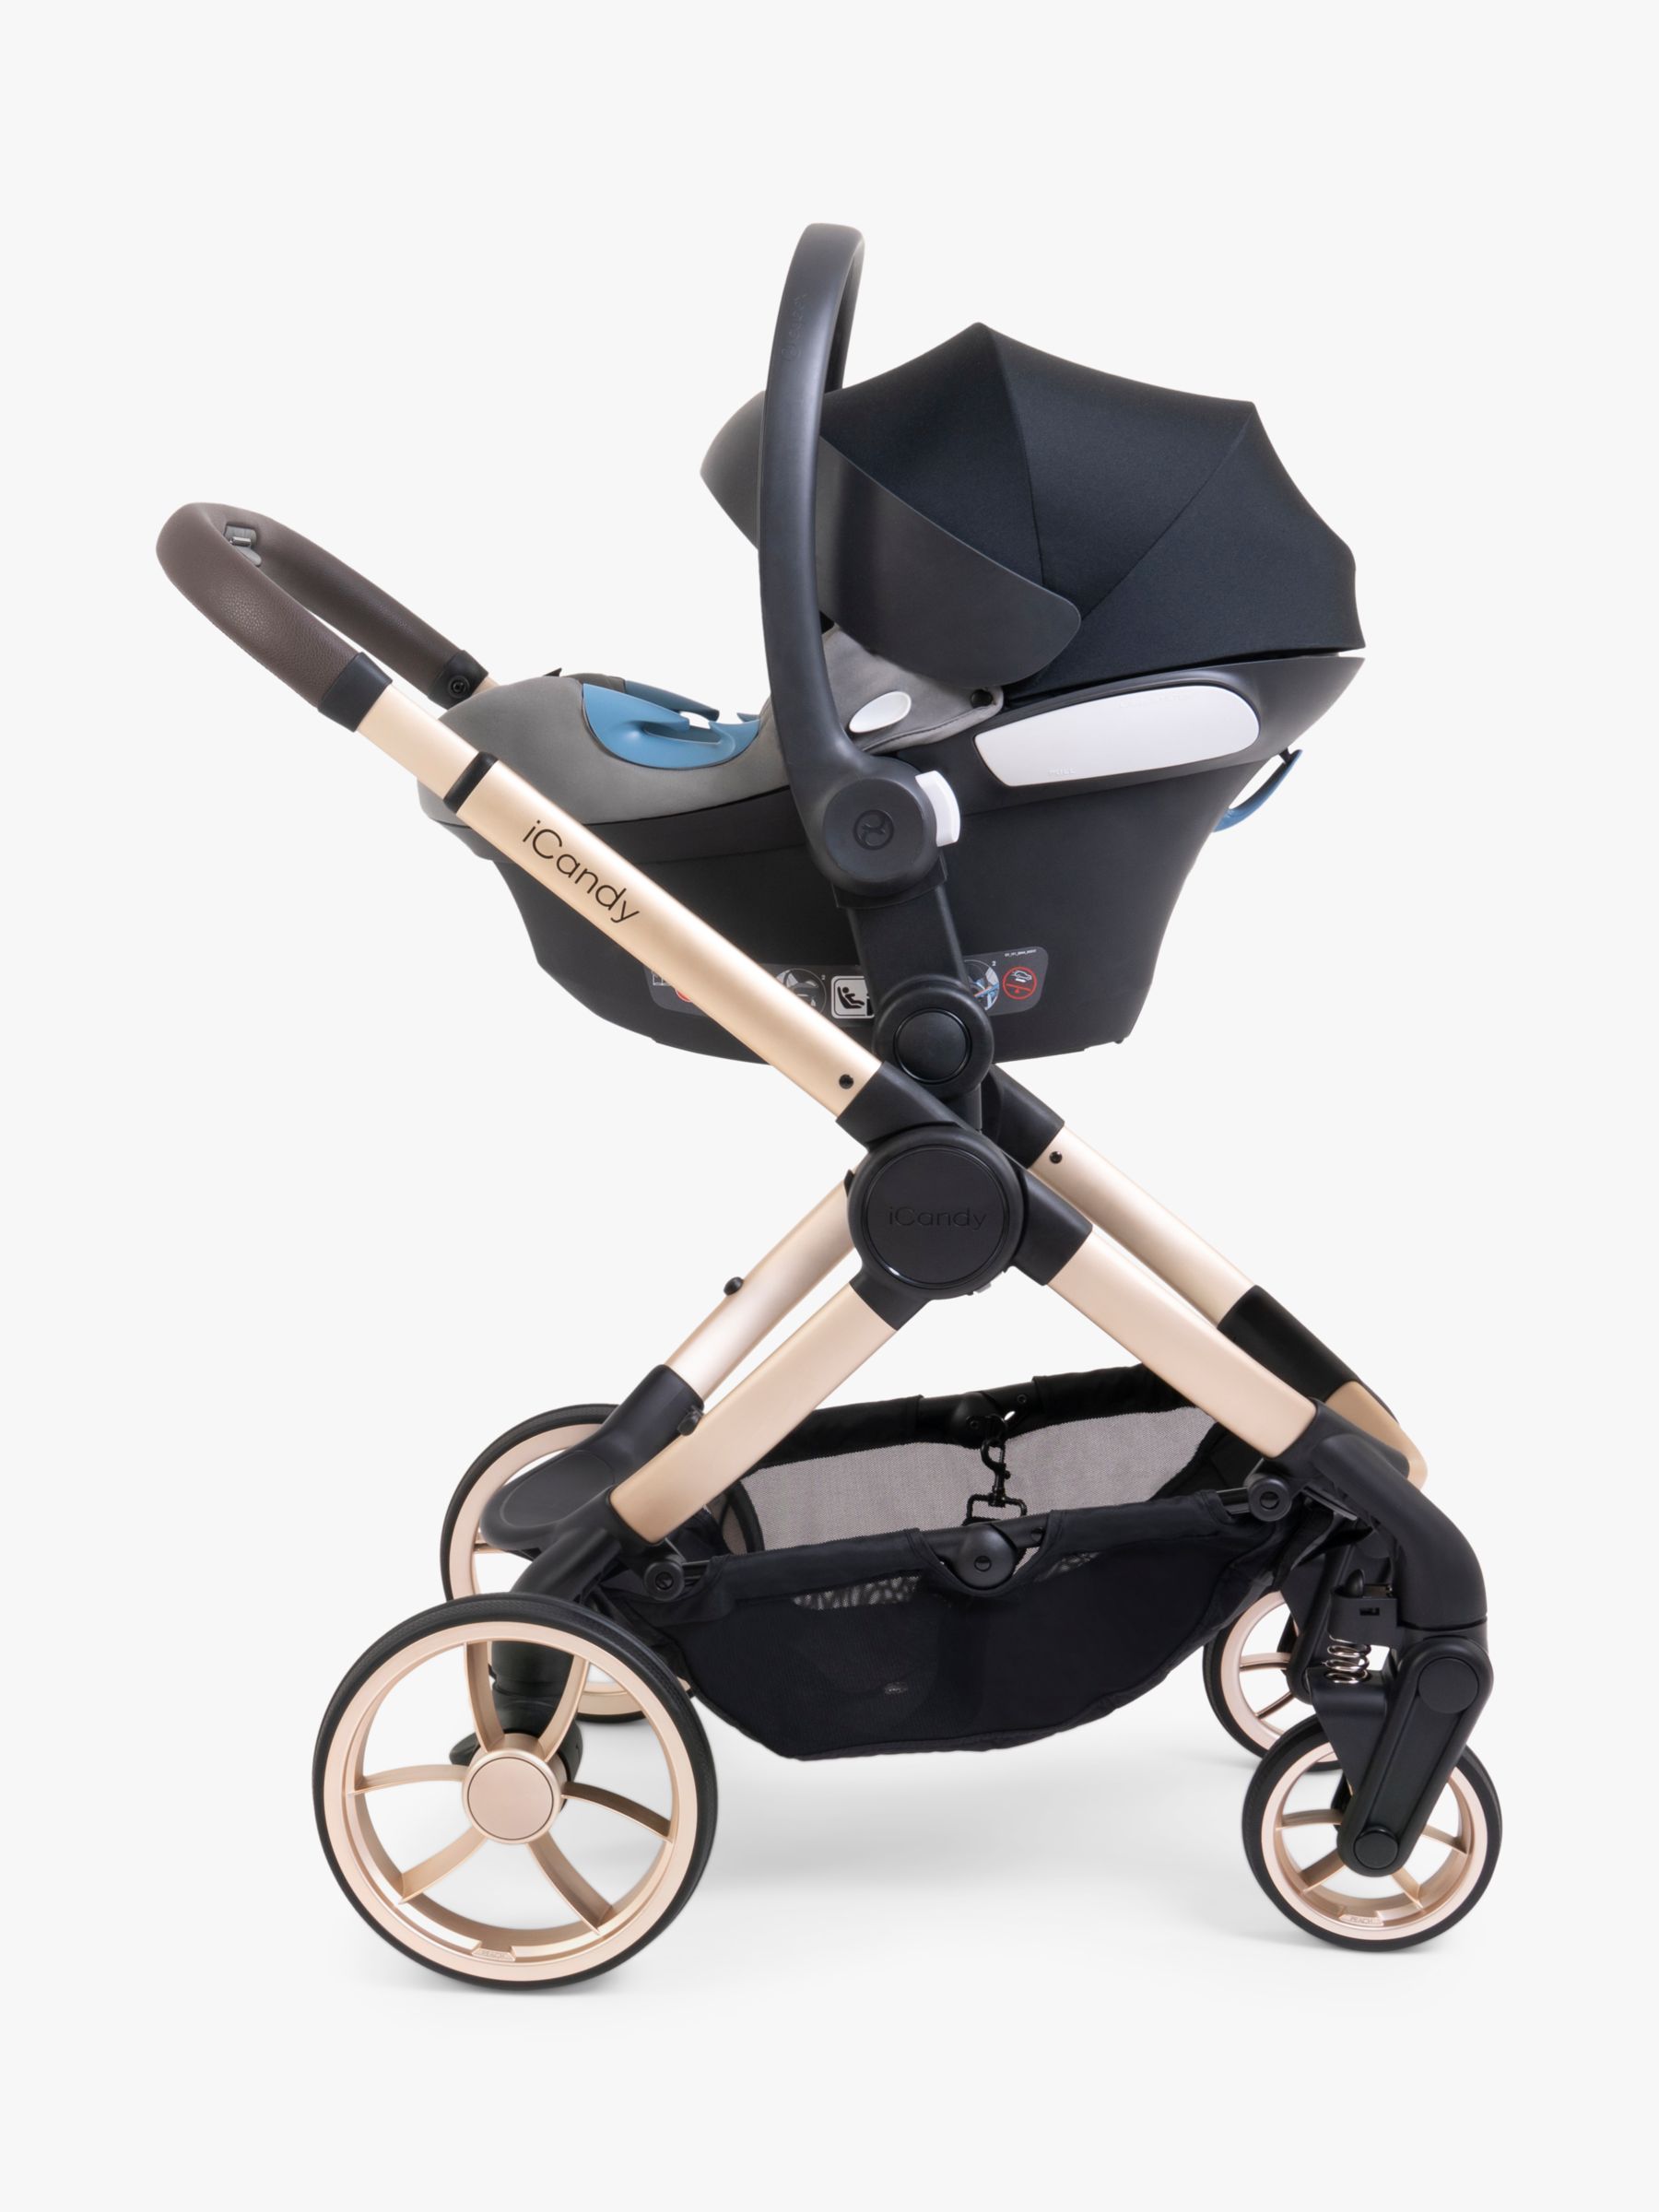 iCandy Peach 7 Pushchair & Accessories with Maxi-Cosi Pebble 360 Baby Car Seat and Base Bundle, Biscotti/Black